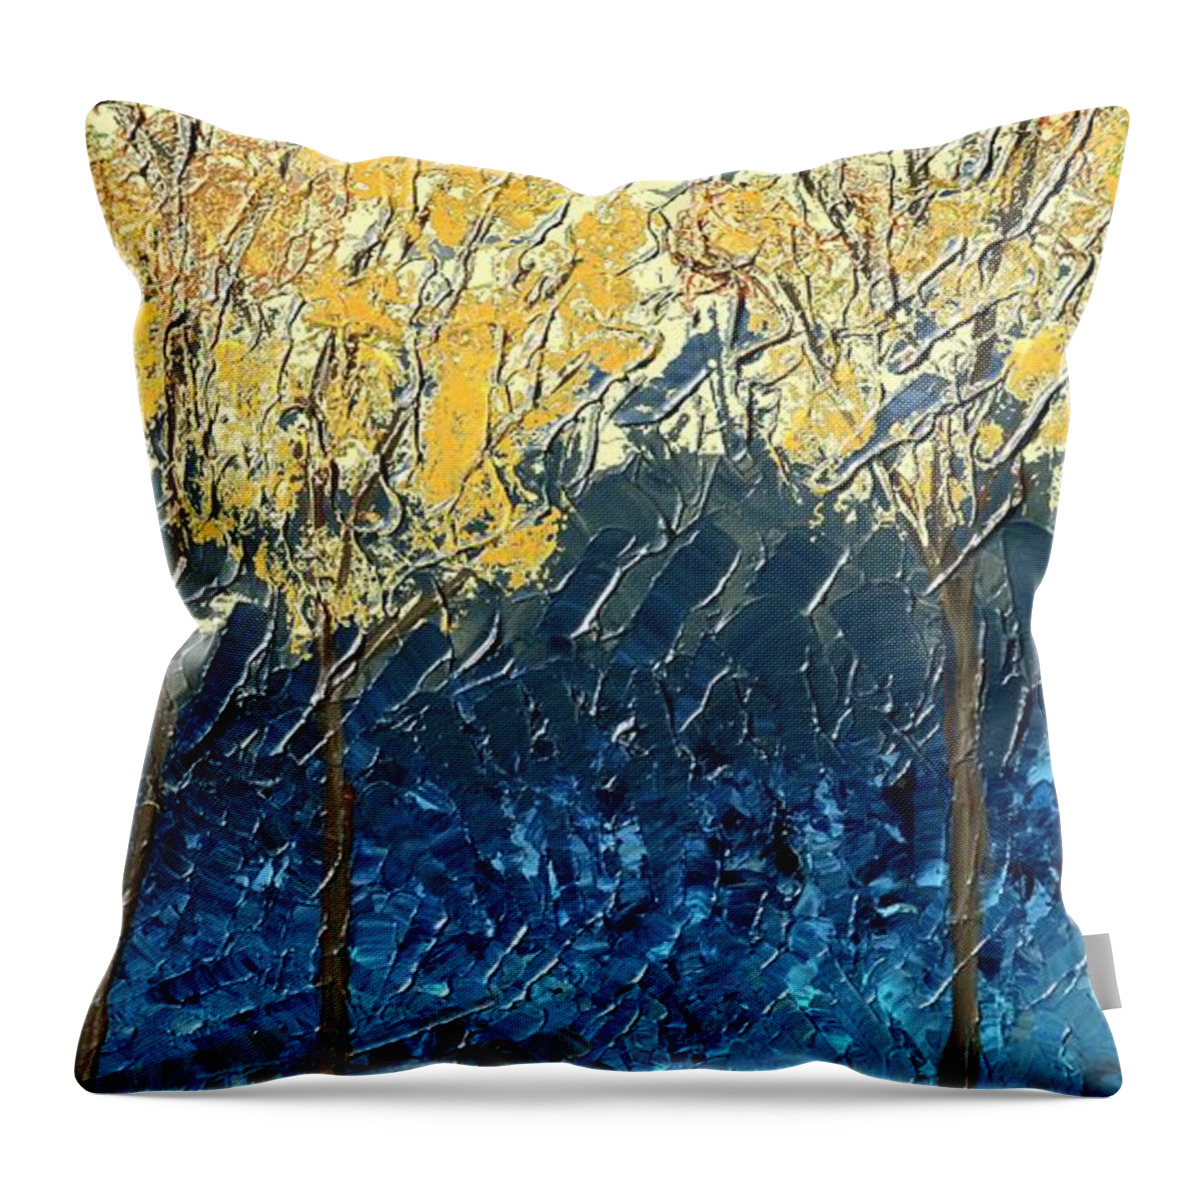 Sundrenched Throw Pillow featuring the painting Sundrenched Trees by Linda Bailey